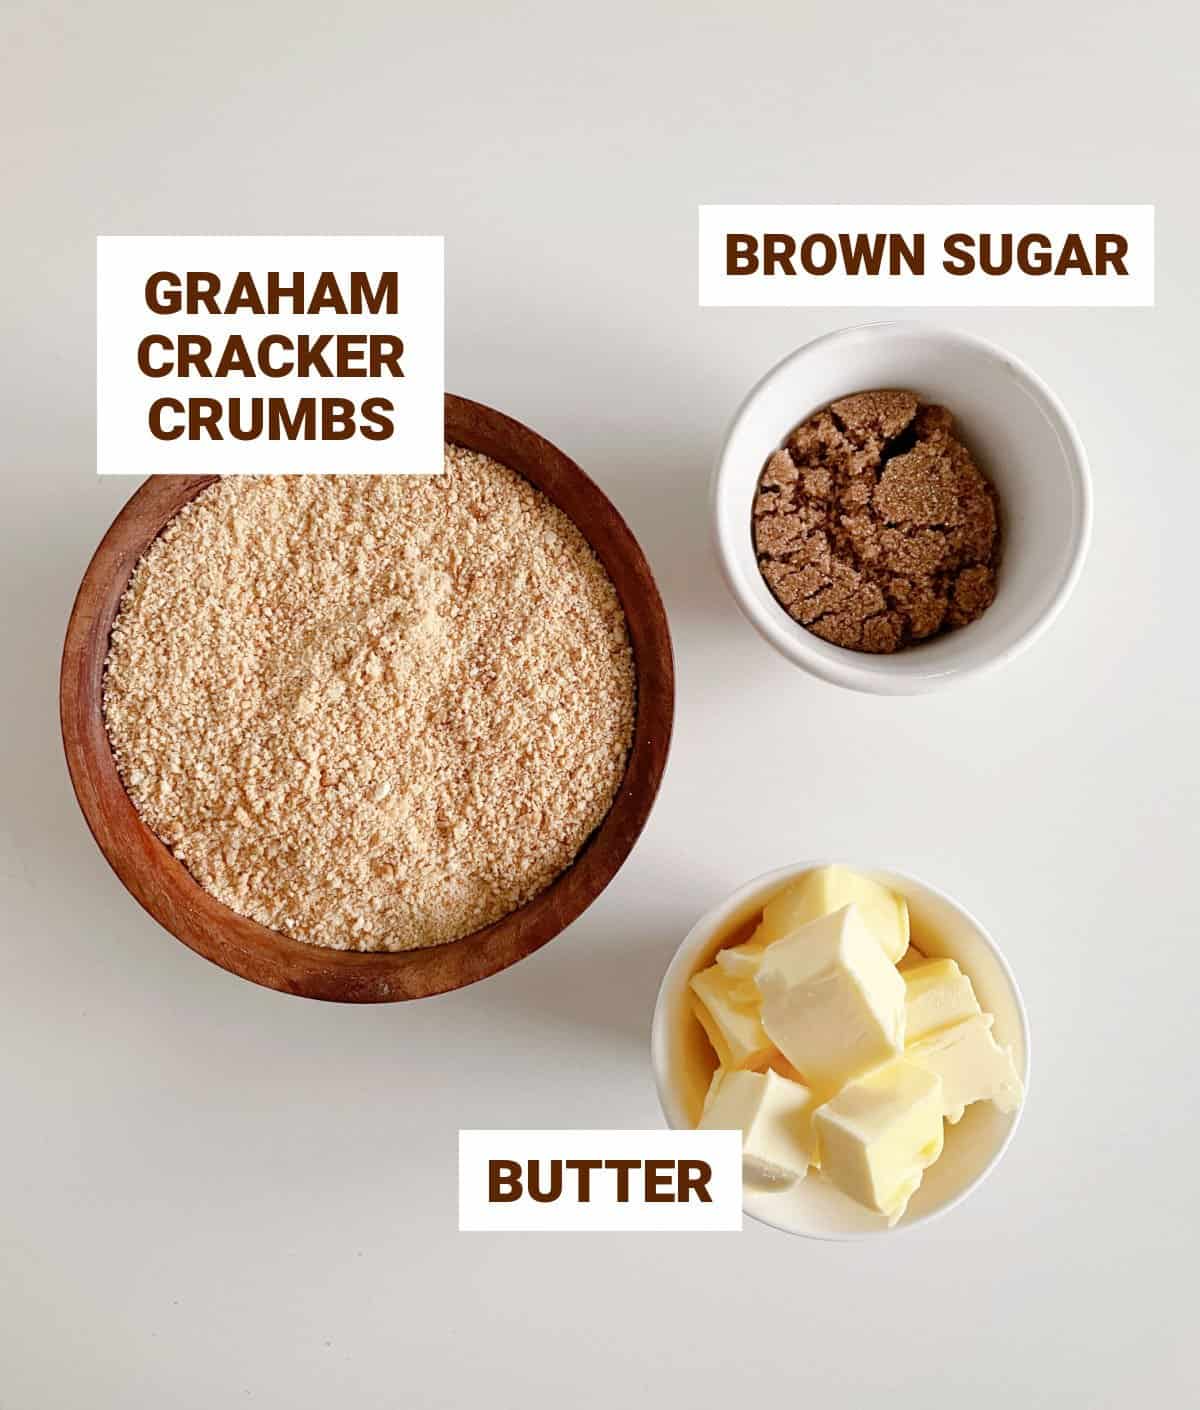 Light colored surface with bowls containing ingredients for graham cracker crust including brown sugar and butter.